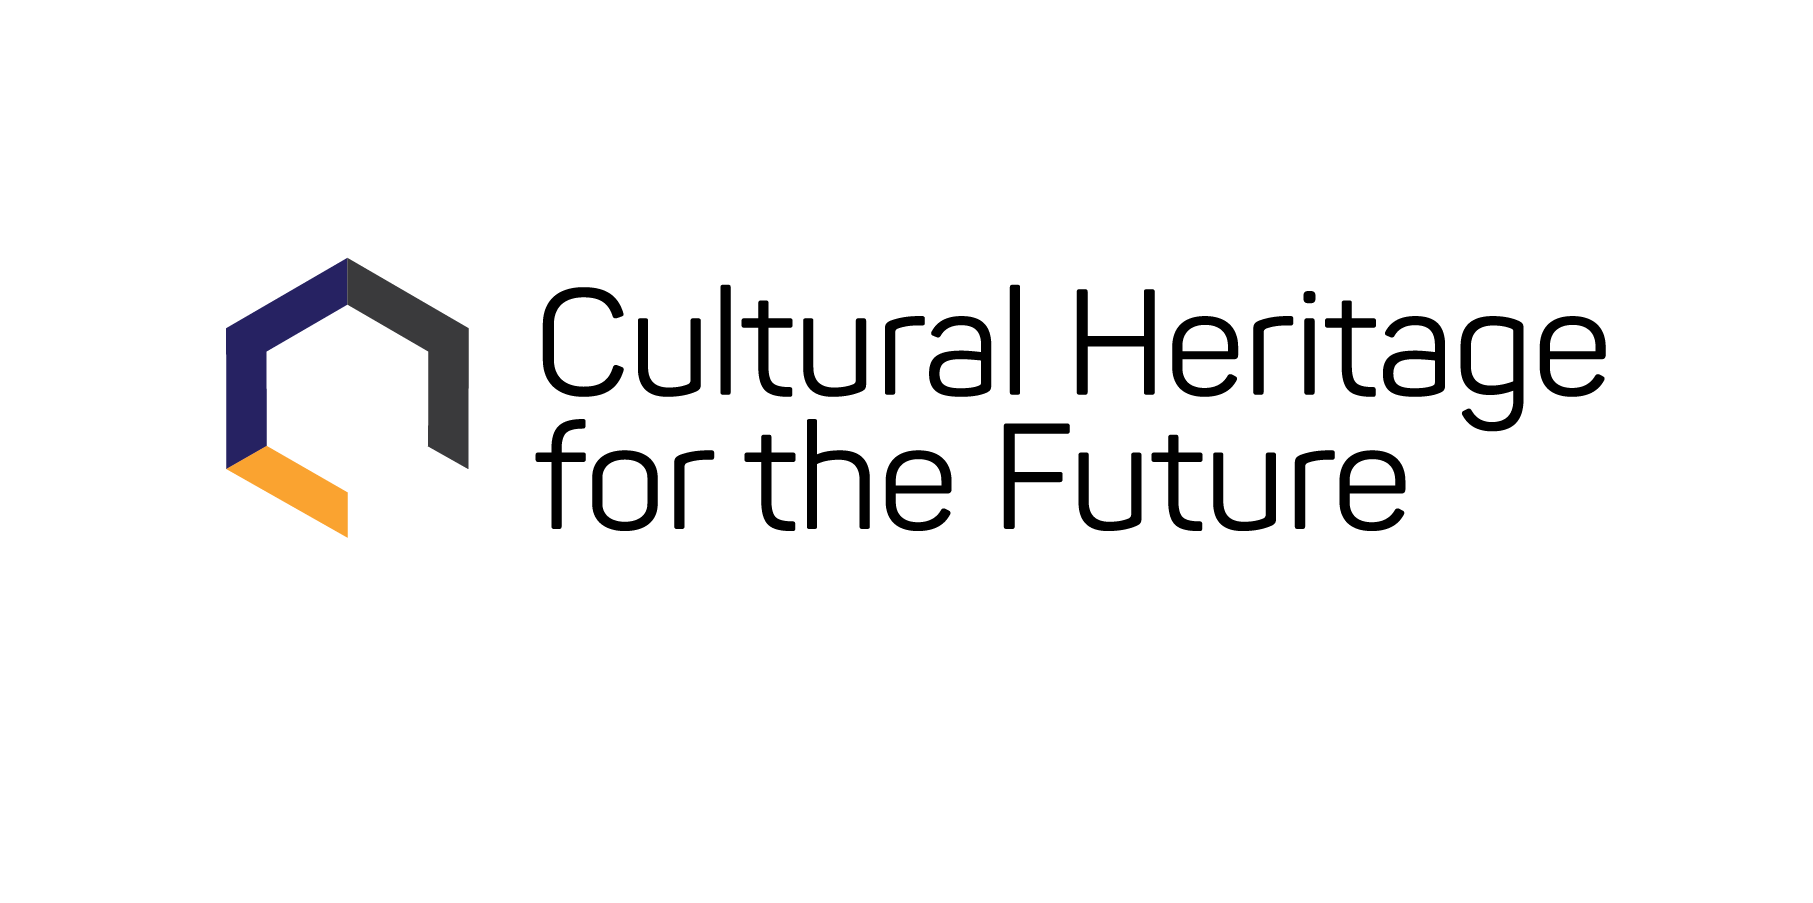 Cultural Heritage for the Future